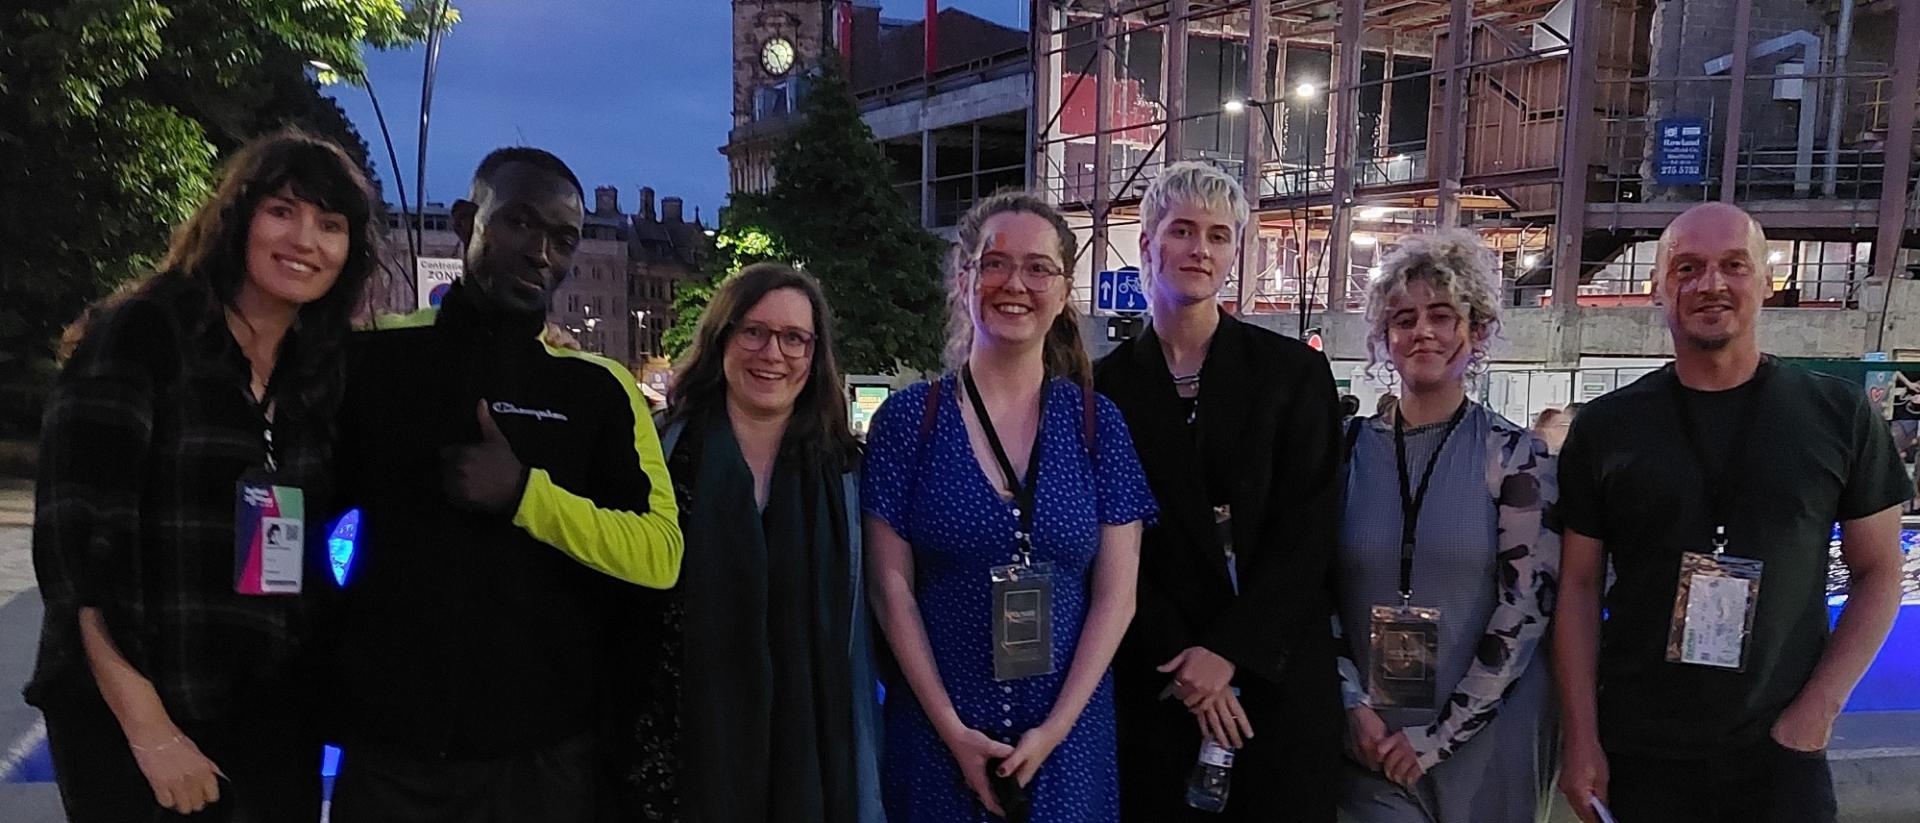 seven people standing in a line posing for a photo outside in the evening. there are buildings, including a clock tower, and trees behind them